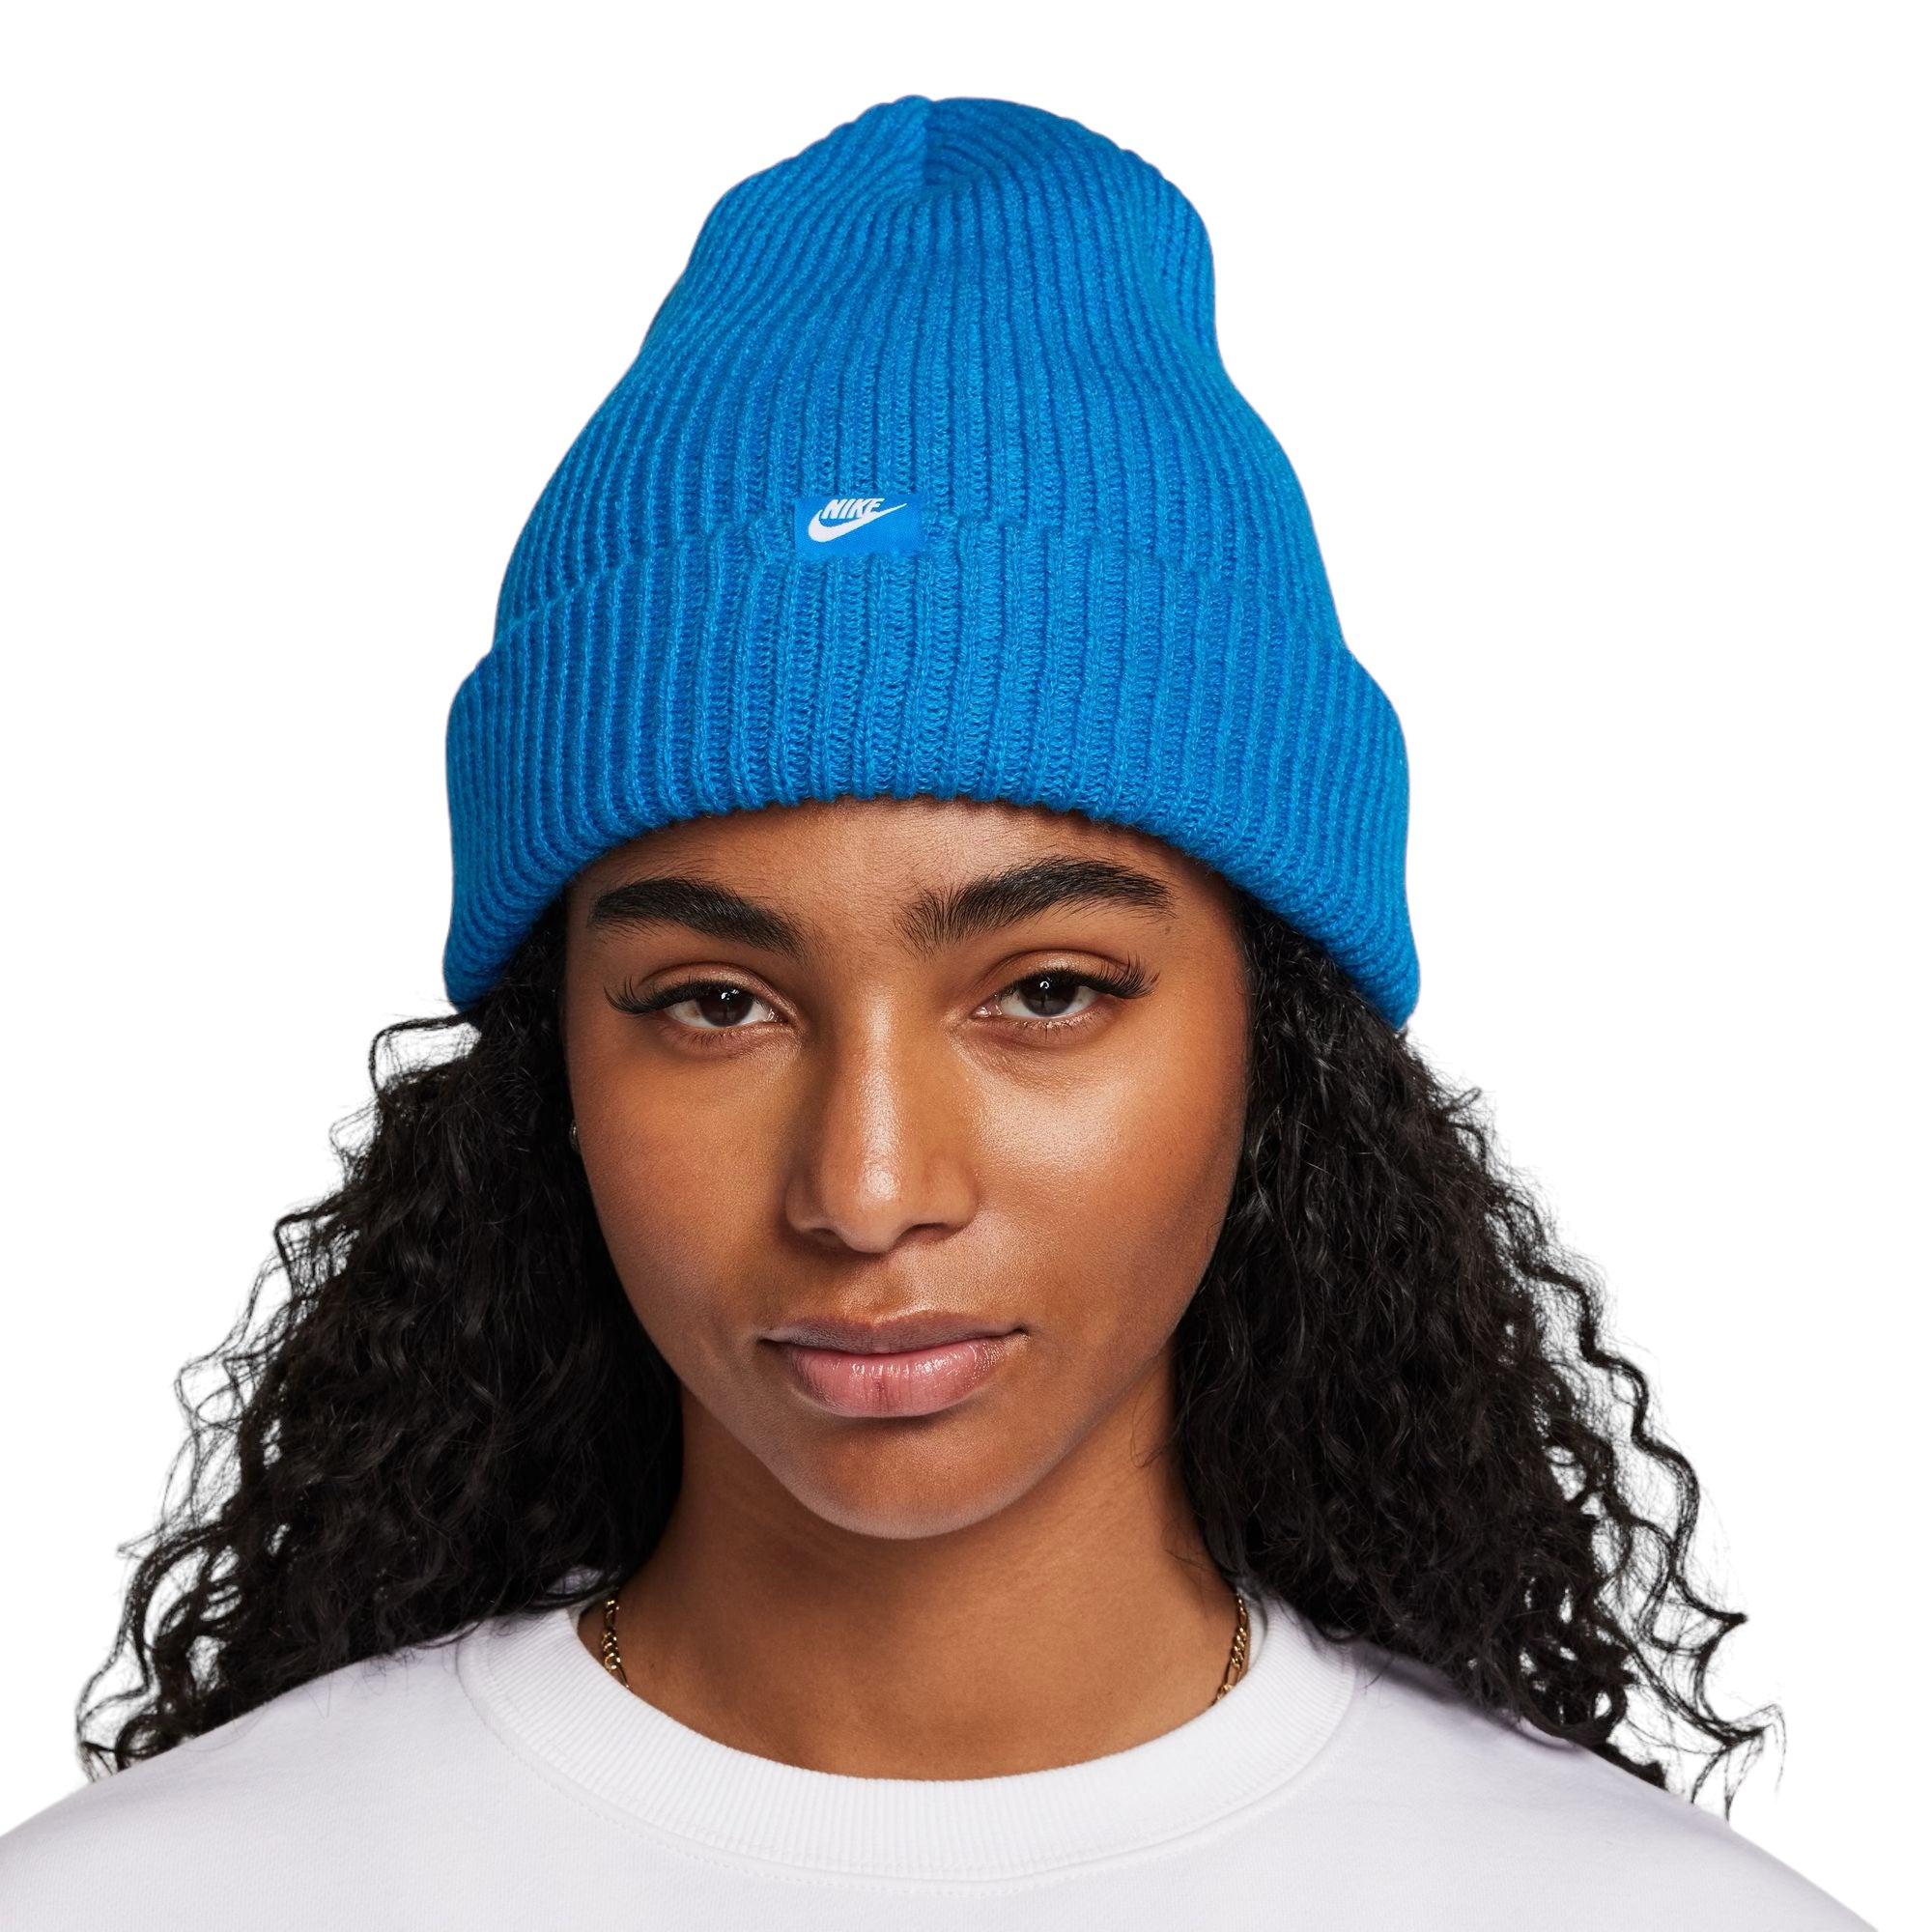 Ocean blue ribbed and cuffed nike beanie with white nike sb swoosh logo tab on front. Free uk shipping over £50